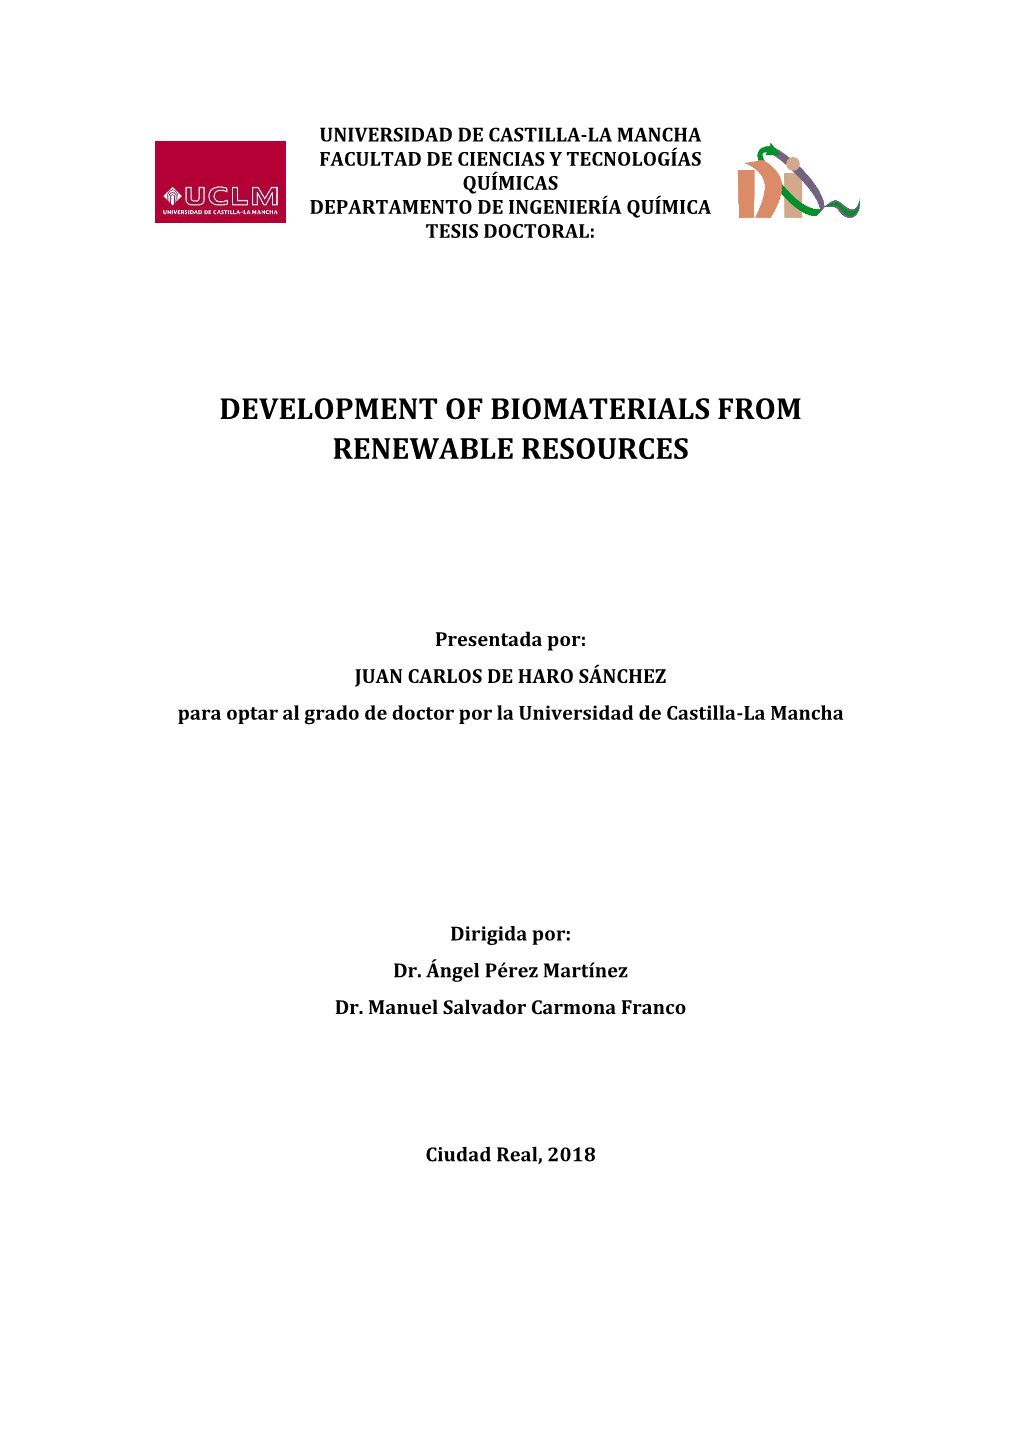 Development of Biomaterials from Renewable Resources